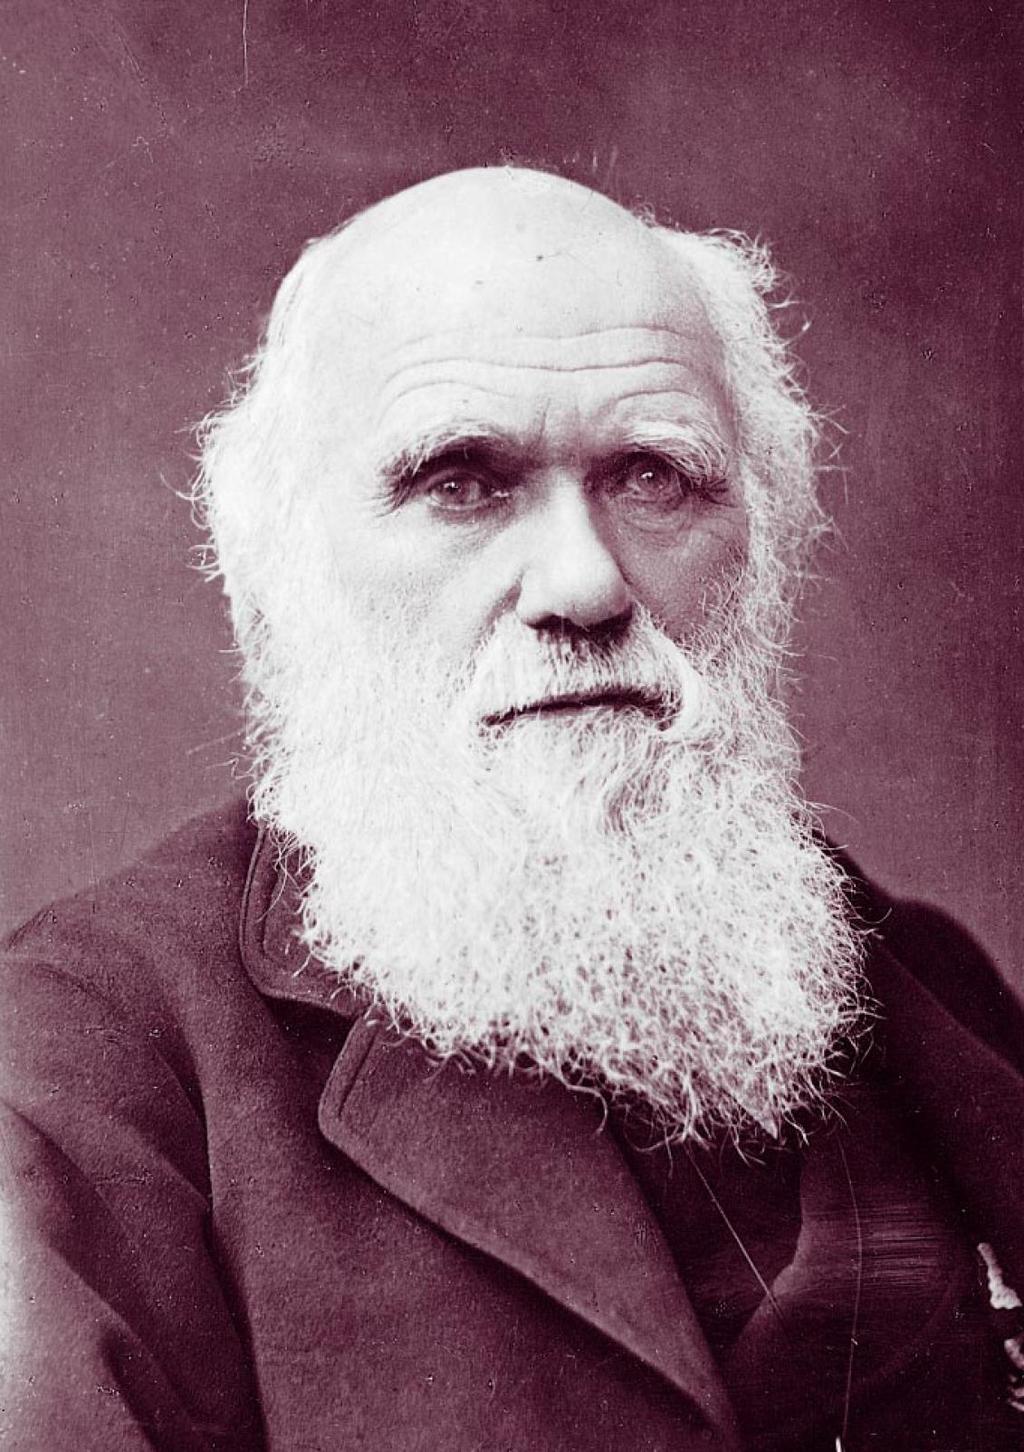 Charles Darwin He was a famous British scientist who founded the Theory of Evolution and is responsible for altering the way people perceive the natural world.